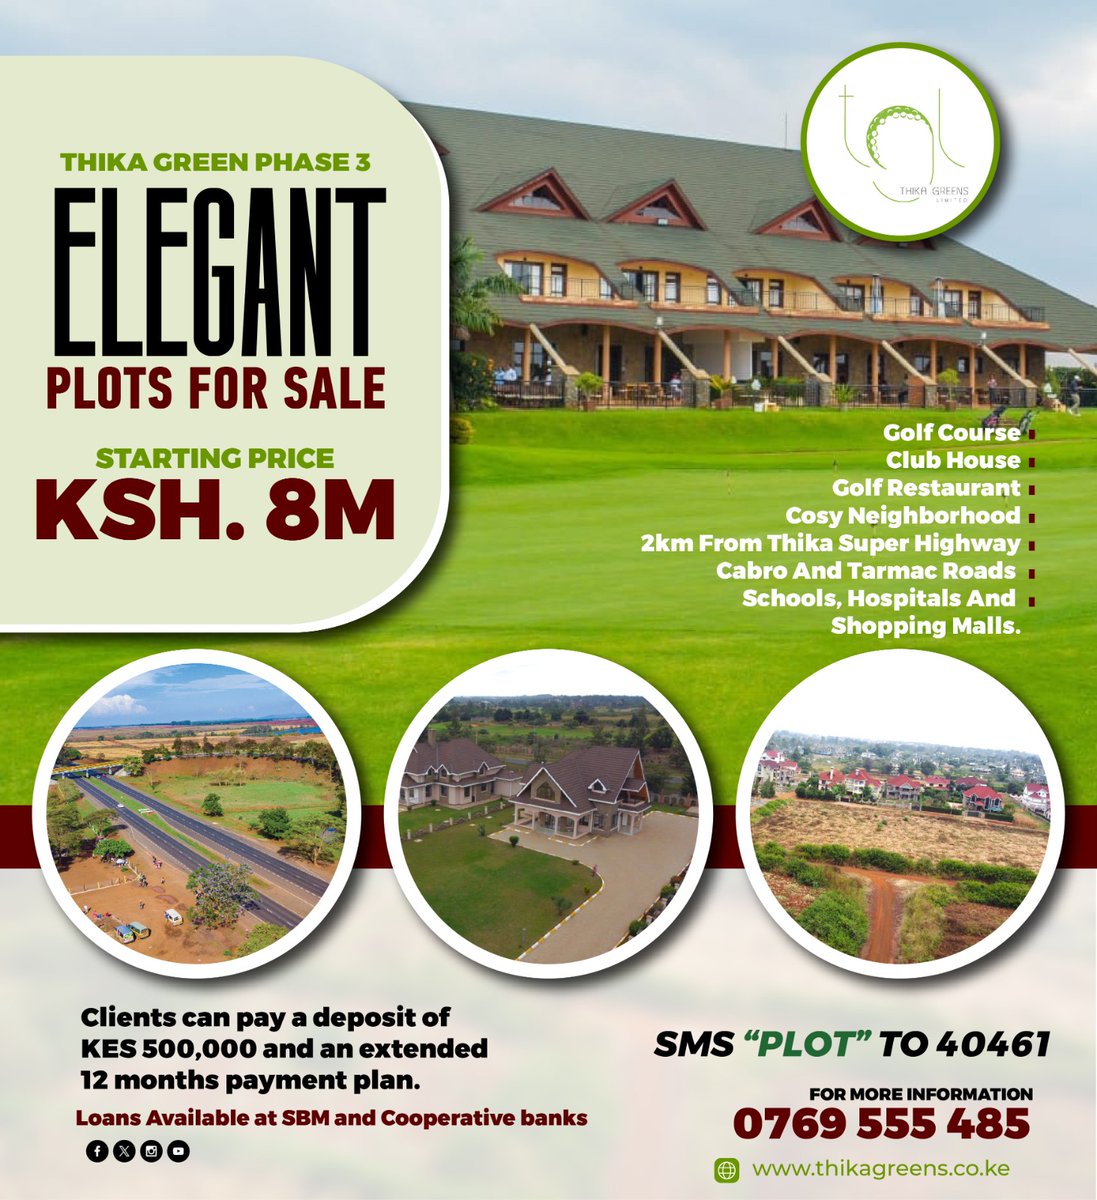 Come see us at Thika Greens Phase 3, and get yourself a ¼ acre plot surrounded by spectacular views and the freshest air.
#ThikaGreensPhase3 #ThikaGreens #Property  #PropertyOwnership #LandInKenya  #OwnLandInKenya #LandsForSale #PrimeLandInKenya#LandForSaleInKenya#LandInvestment